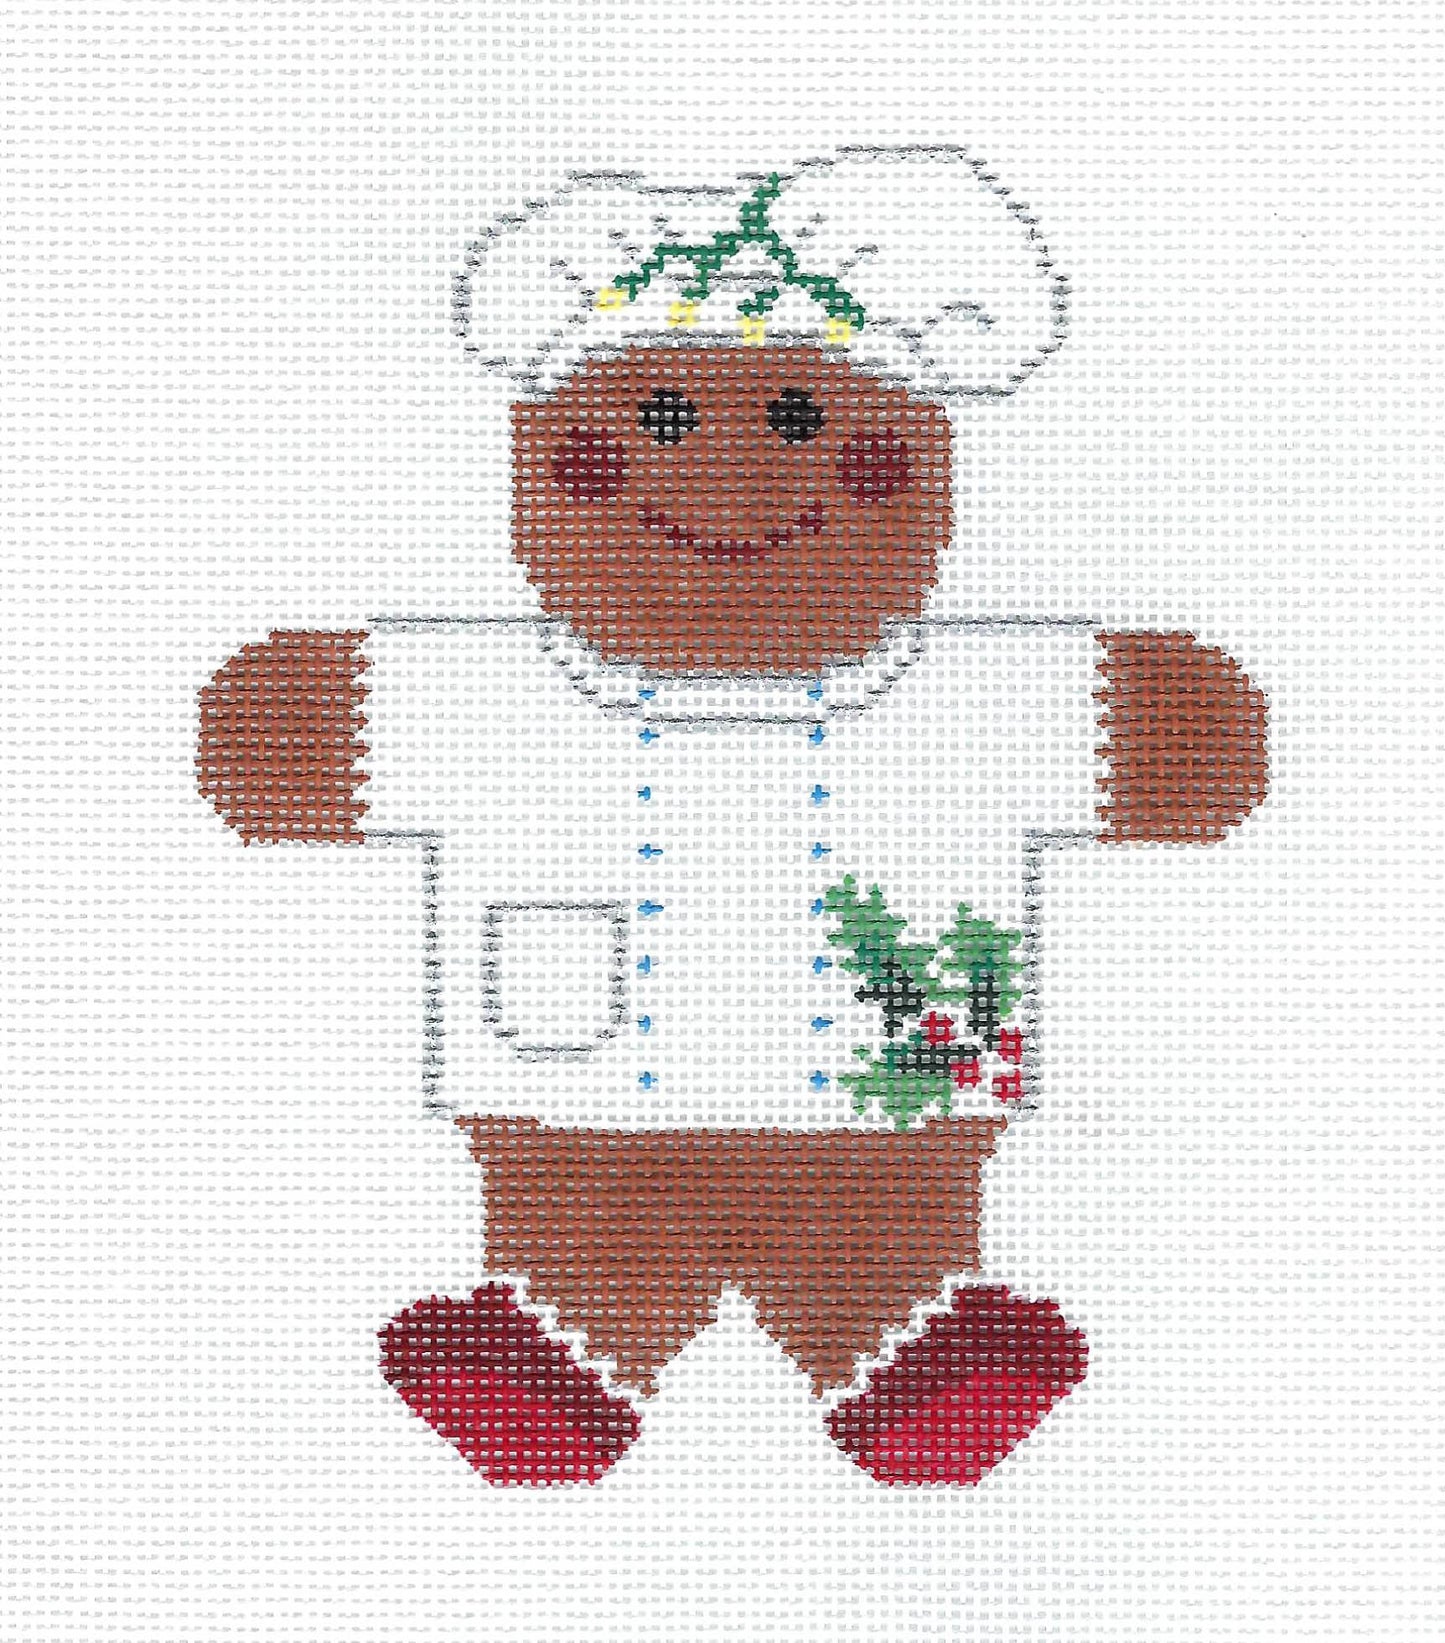 Chef Gingerbread Man in Apron Ornament  HP Needlepoint Canvas by Whimsy & grace